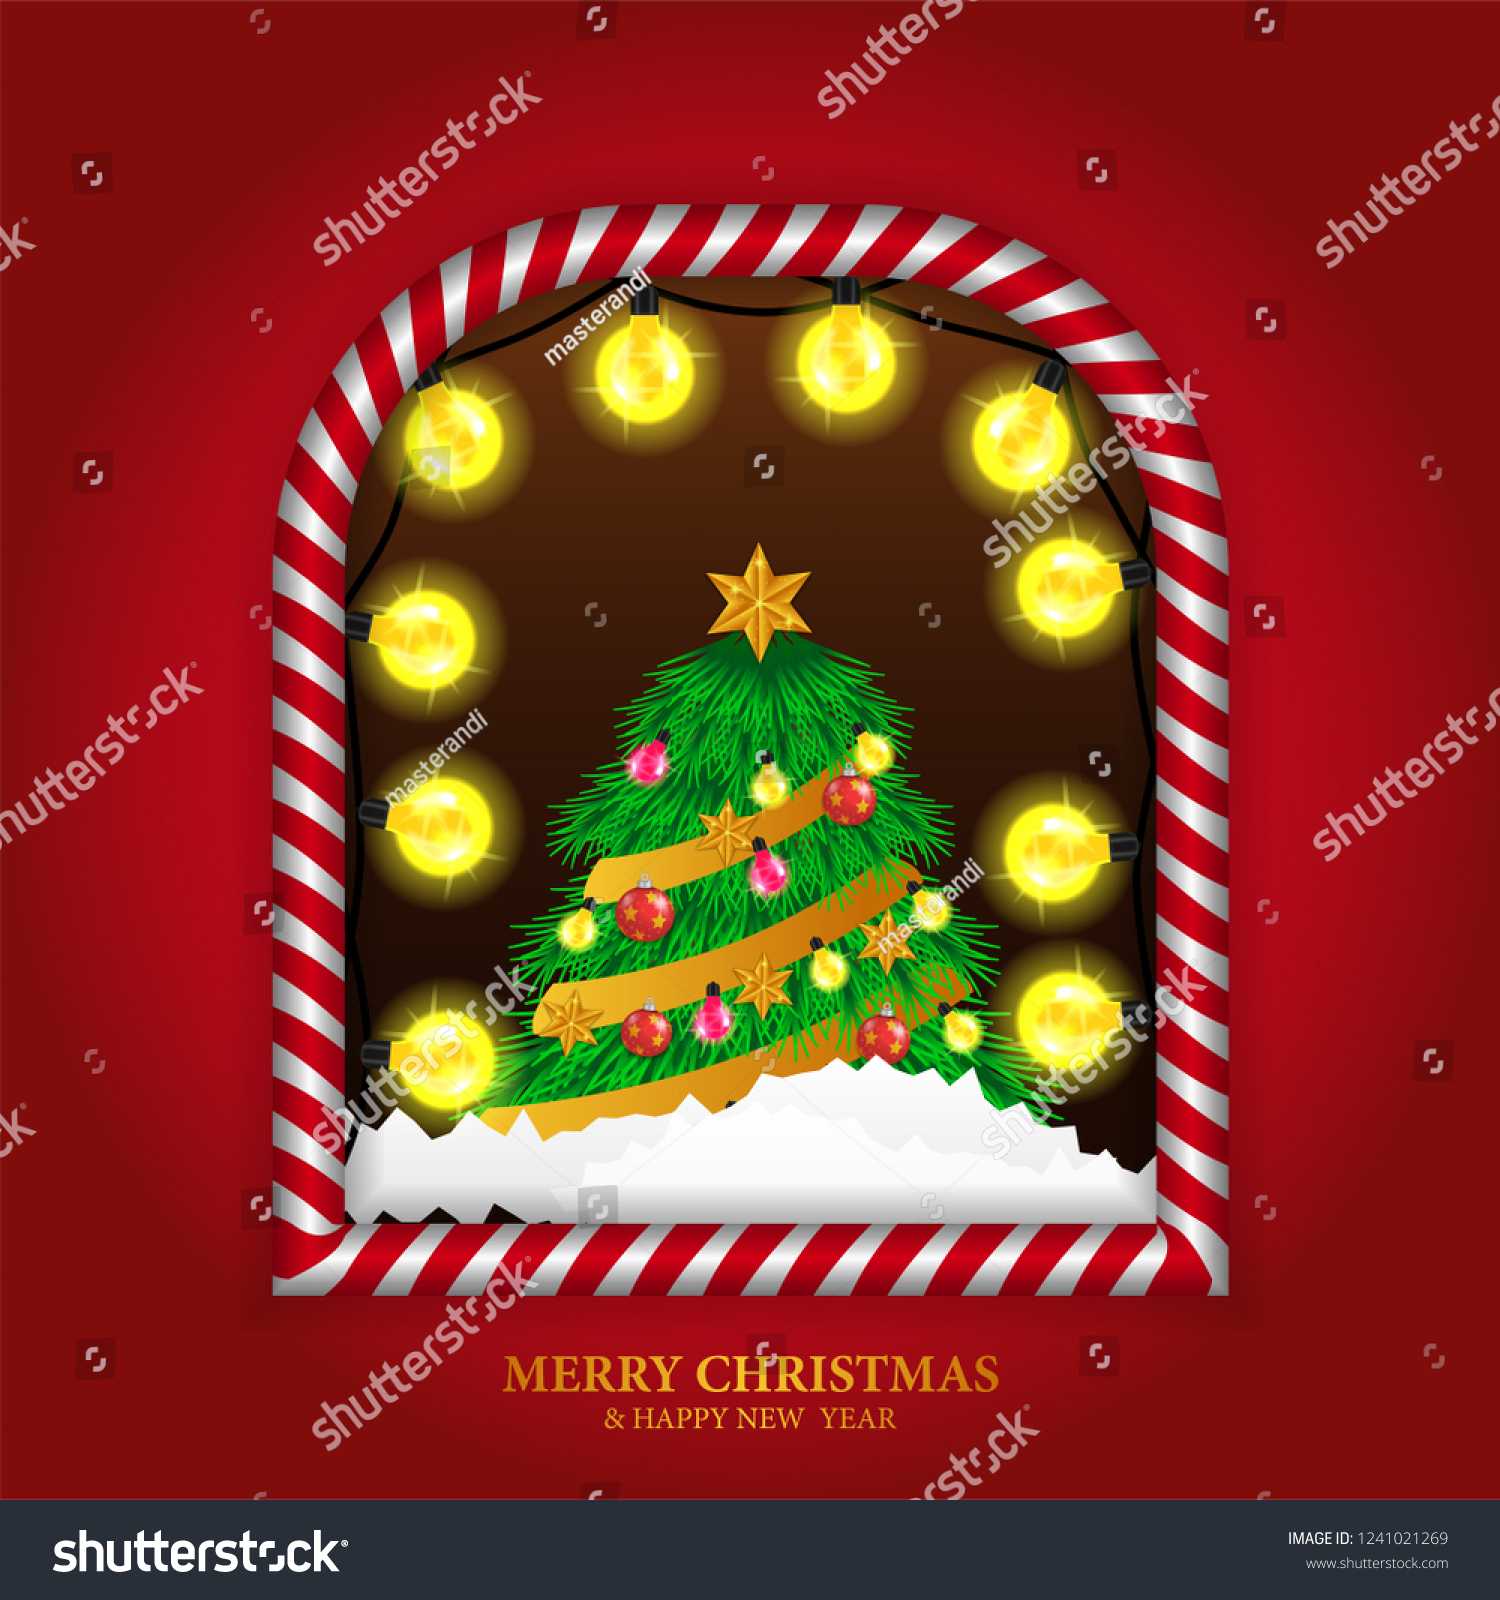 Merry Christmas Banner Template Windows Frame Stock Vector With Regard To Merry Christmas Banner Template